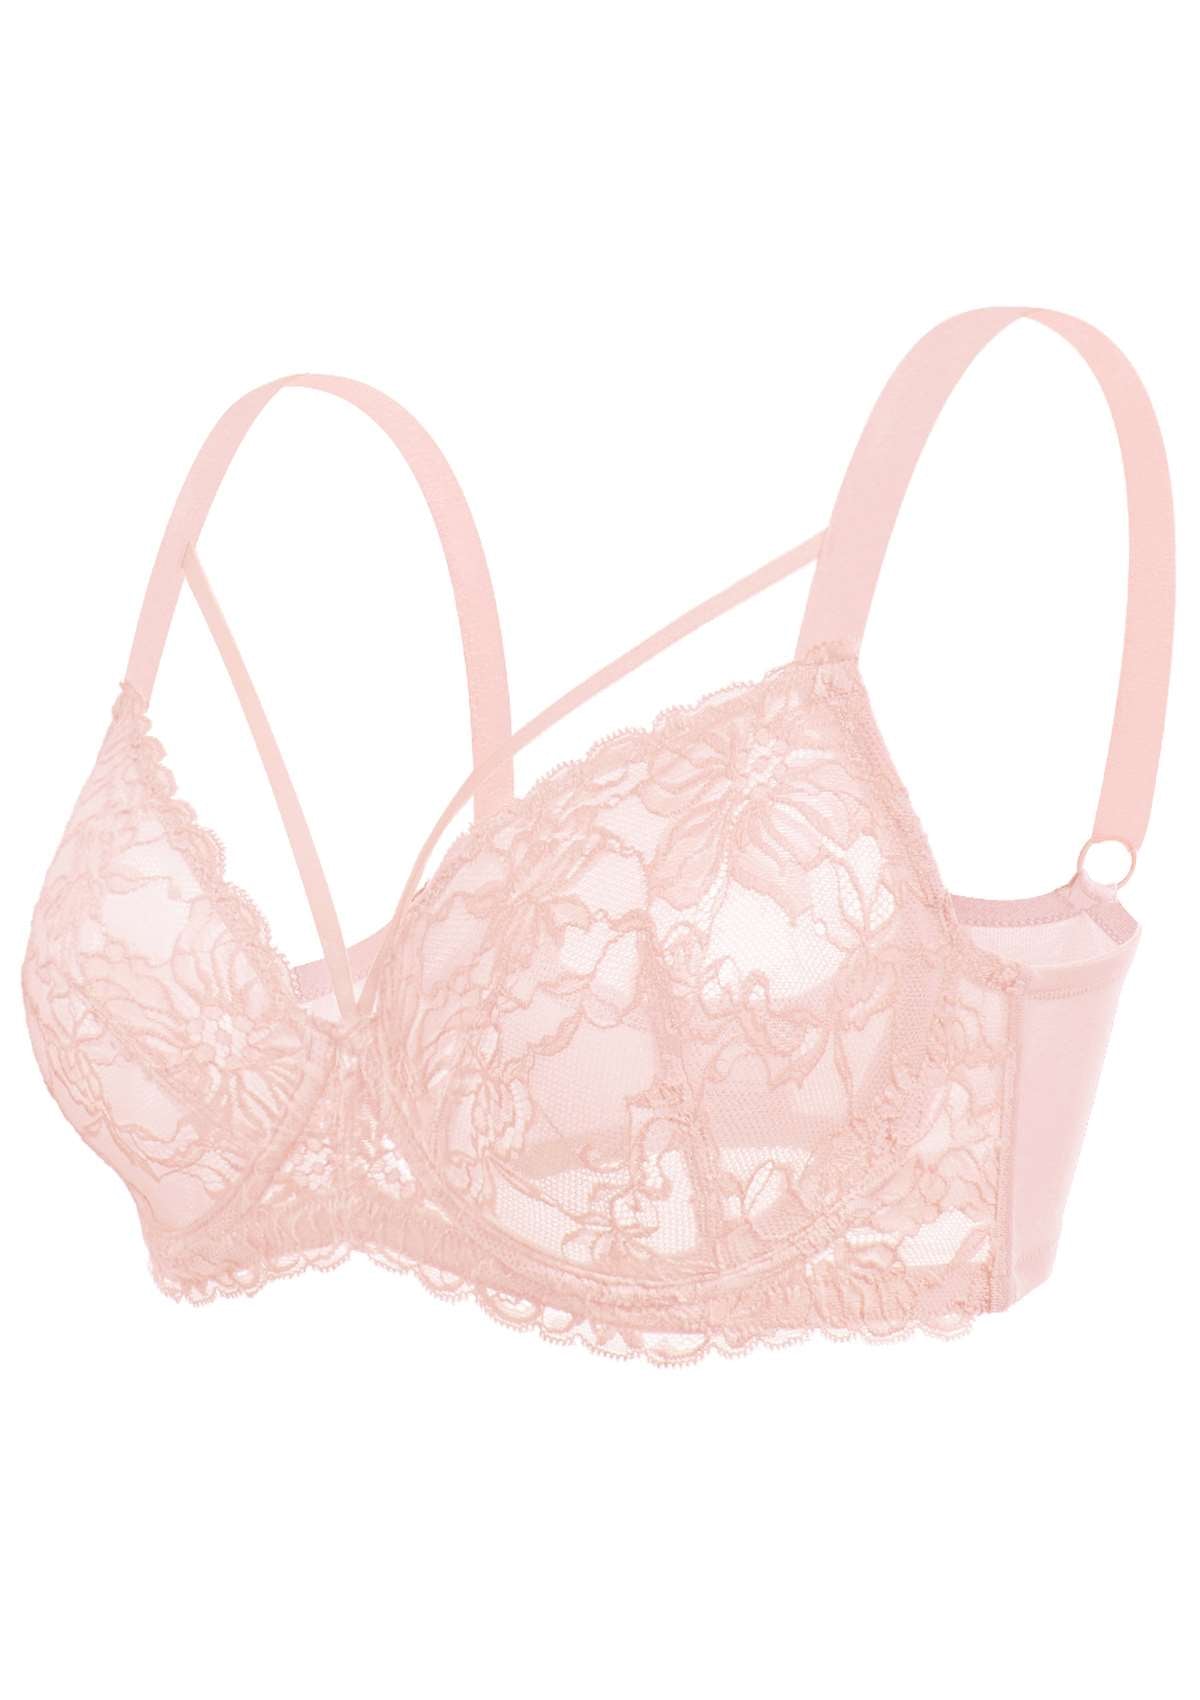 HSIA Pretty In Petals: Strappy Lace Sheer Bra For Side And Back Fat - Beige Cream / 38 / H